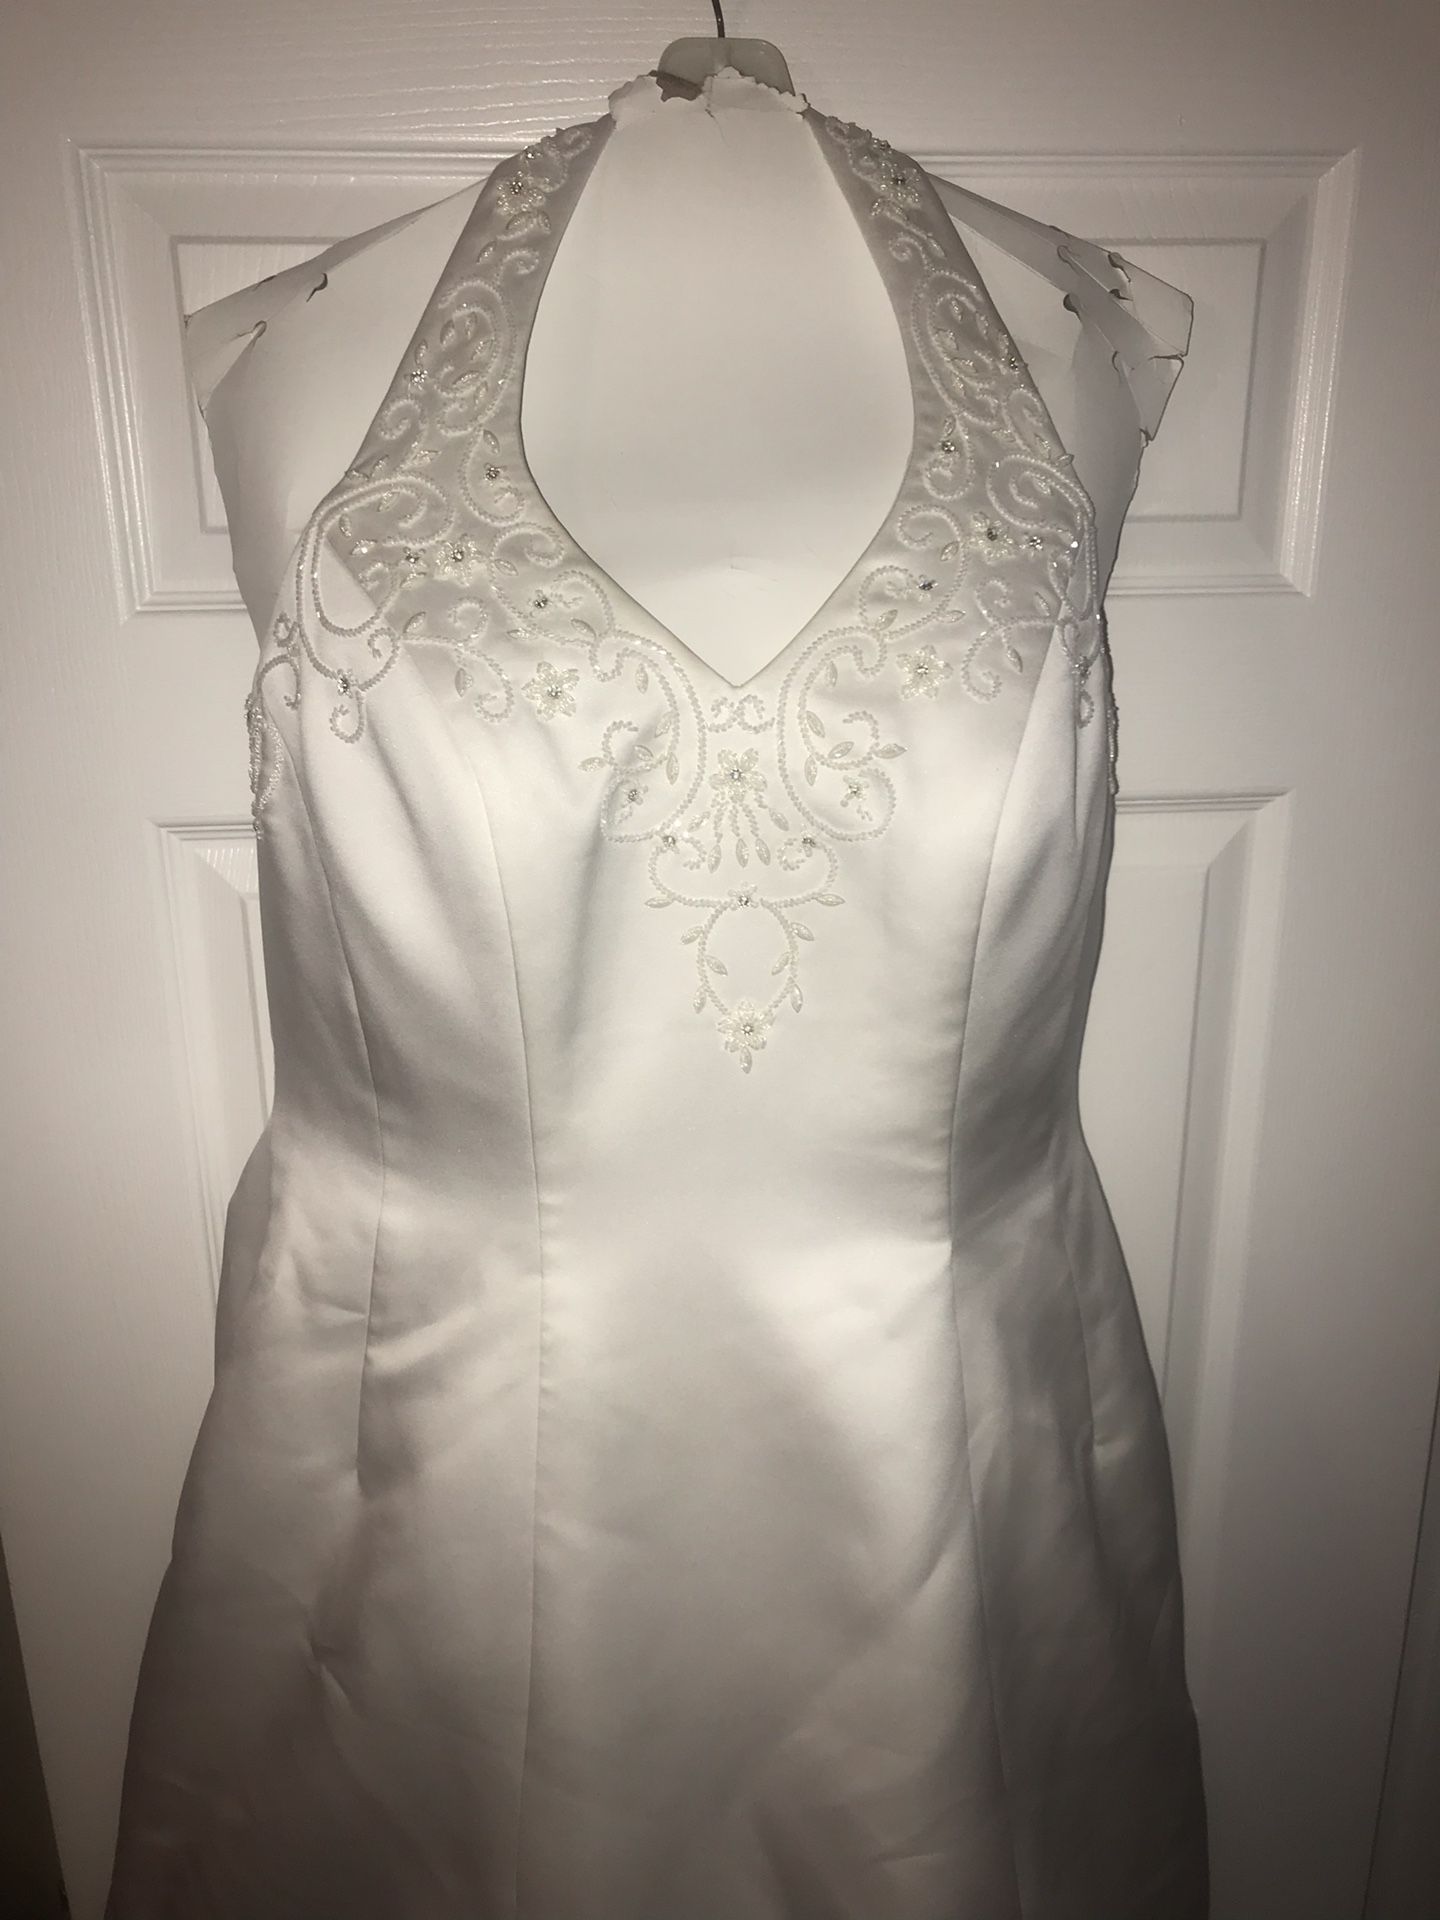 White Ball Gown Wedding Dress Accessories Included